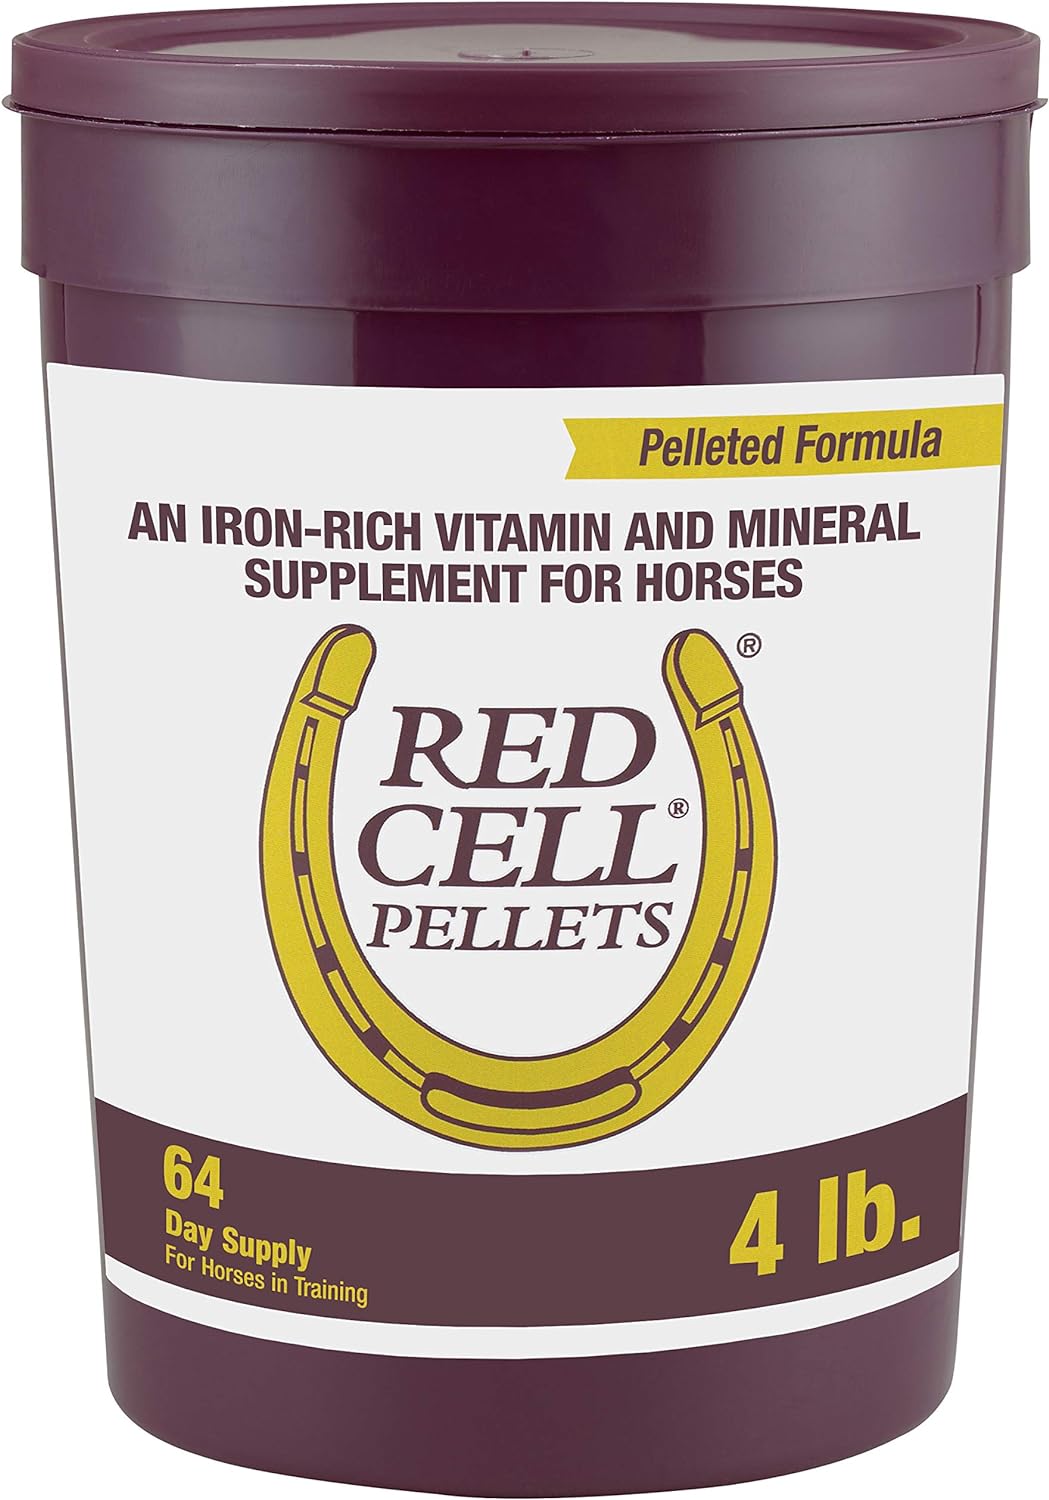 Farnam Horse Health Red Cell Pellets, Vitamin-Iron-Mineral Supplement for Horses, Helps Fill Importa